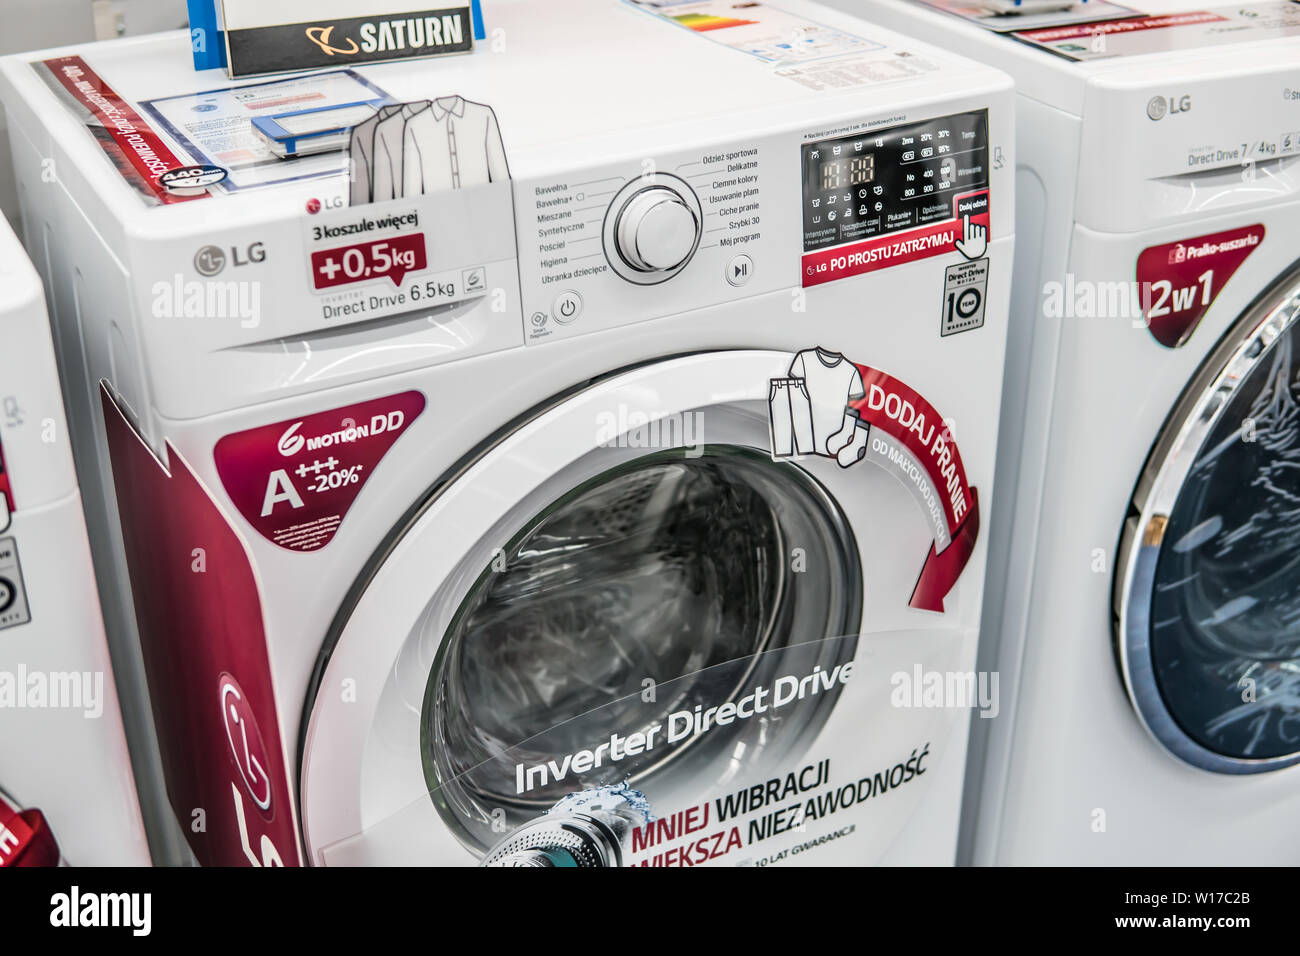 Lg Washing Machine High Resolution Stock Photography and Images - Alamy